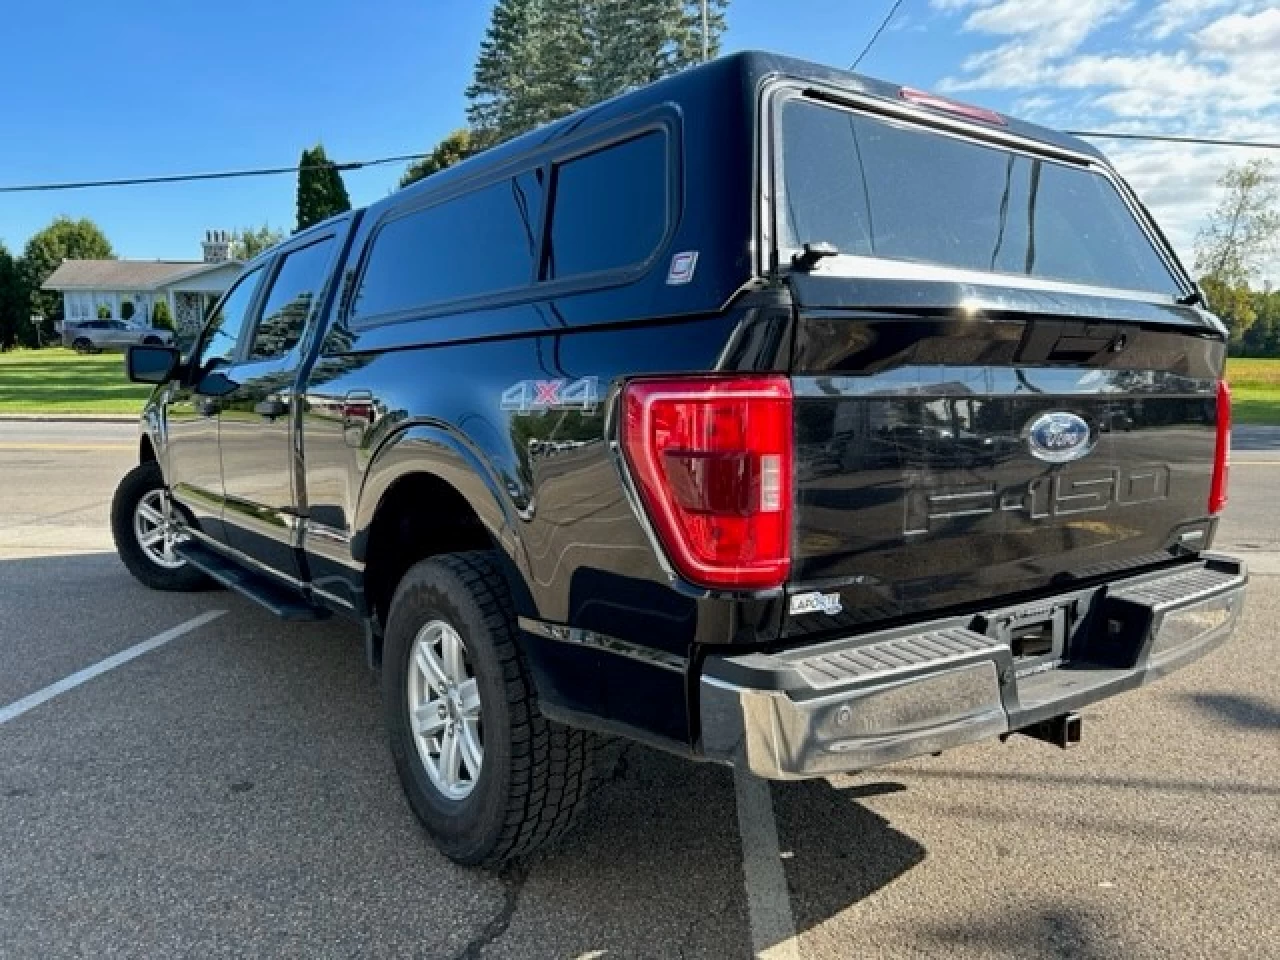 2021 Ford F-150 XLT Main Image